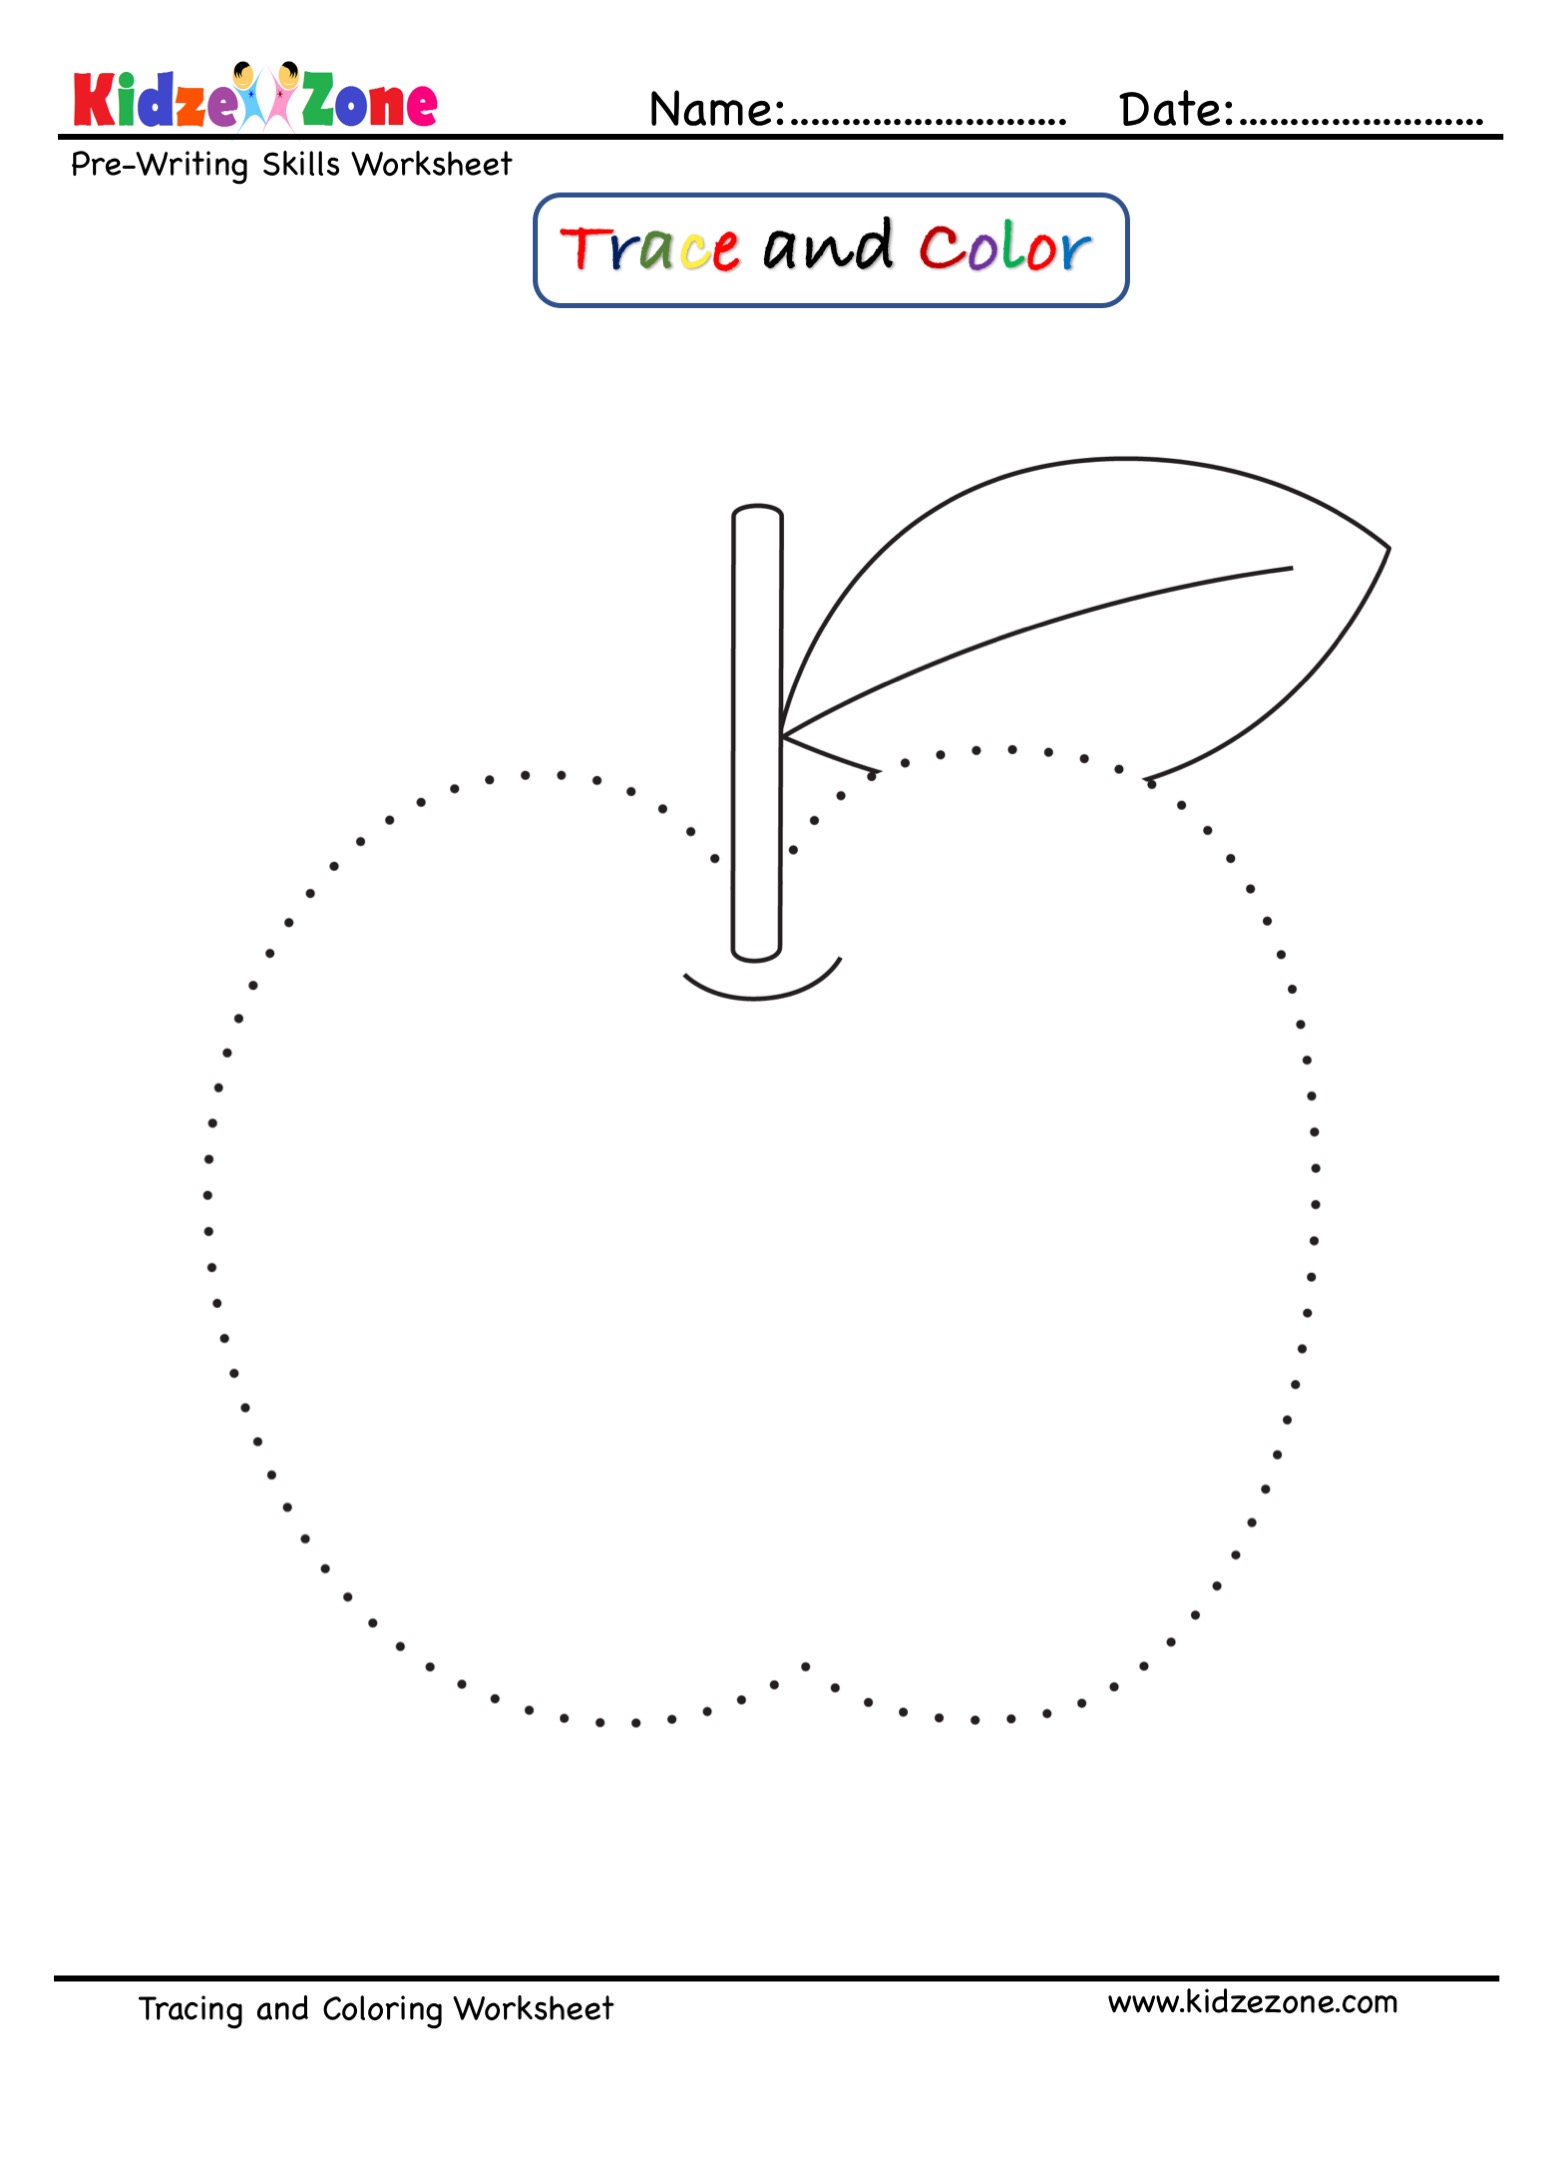 Apple Tracing And Coloring Worksheet Kidzezone